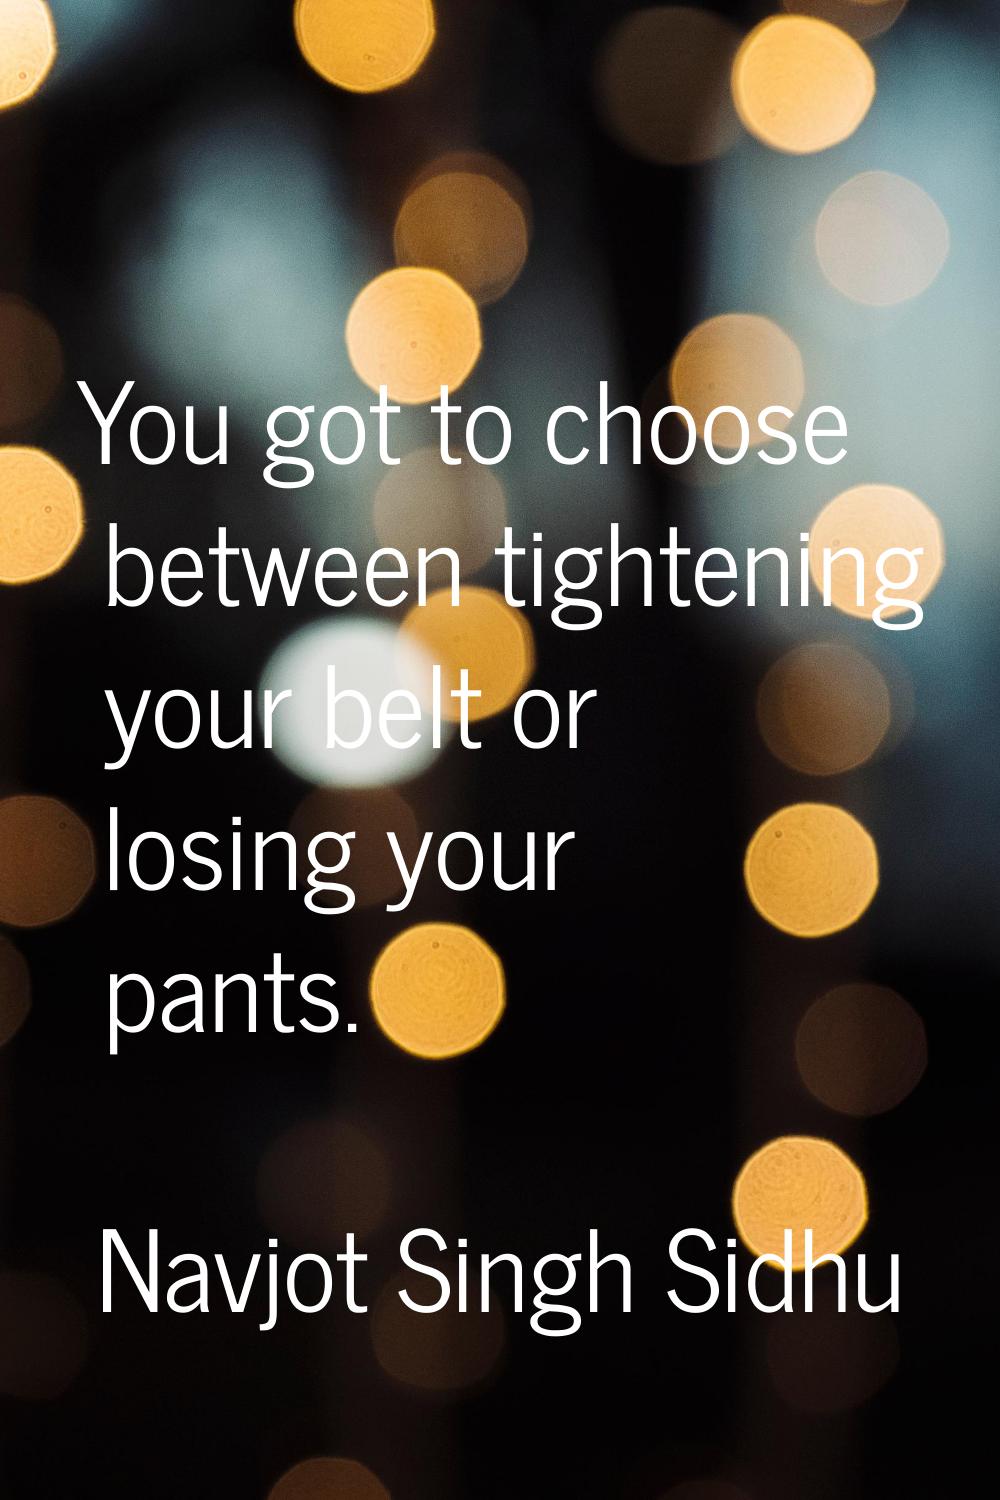 You got to choose between tightening your belt or losing your pants.